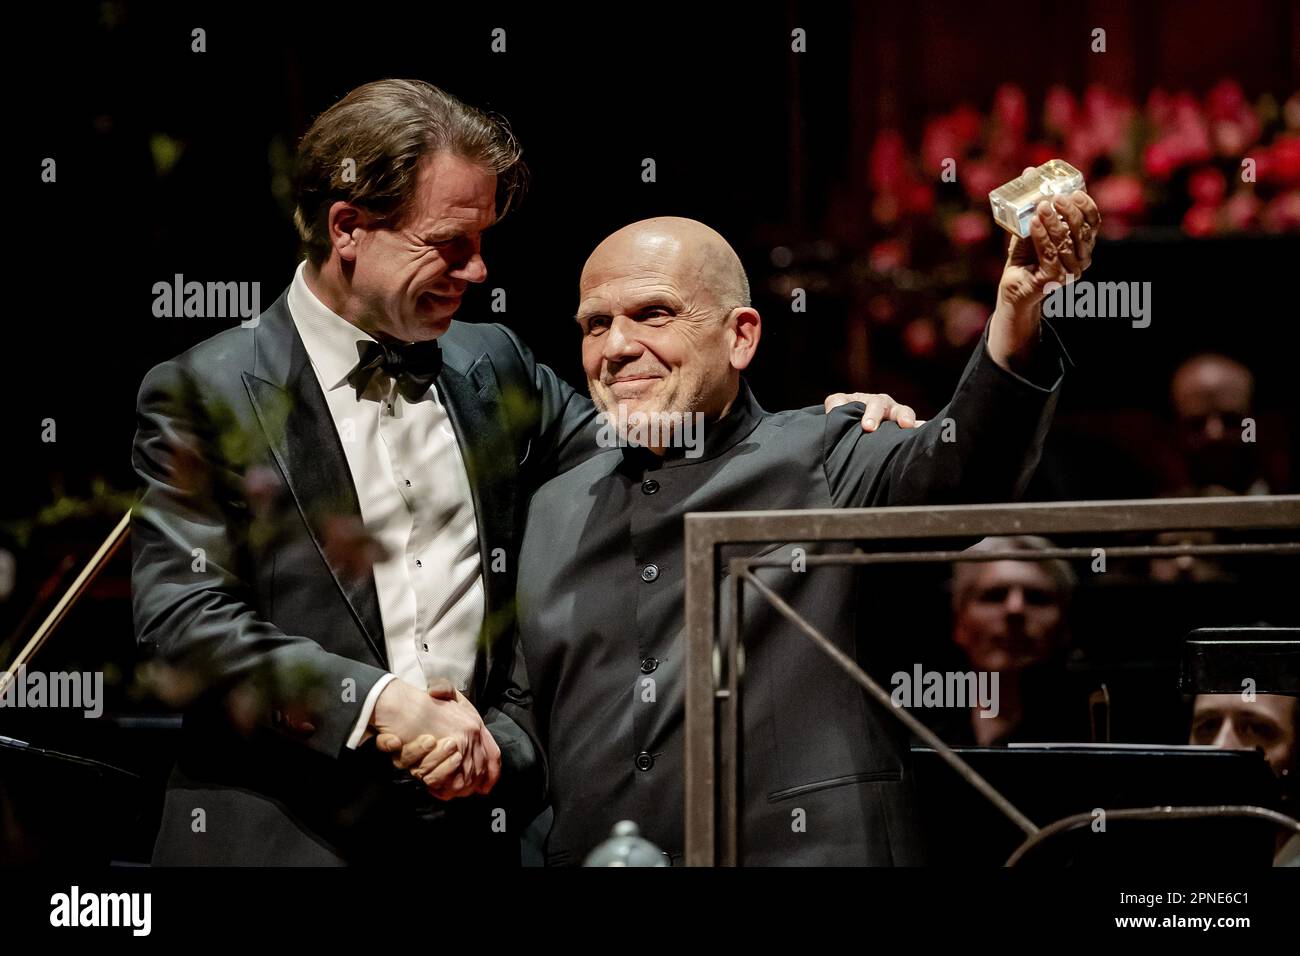 AMSTERDAM - Conductor Jaap van Zweden during the presentation of the Concertgebouw Prize for his contribution to the artistic profile of the Concertgebouw. At the age of 19, the 62-year-old Van Zweden became the youngest ever concertmaster of the Concertgebouworkest. ANP ROBIN VAN LONKHUIJSEN netherlands out - belgium out Stock Photo